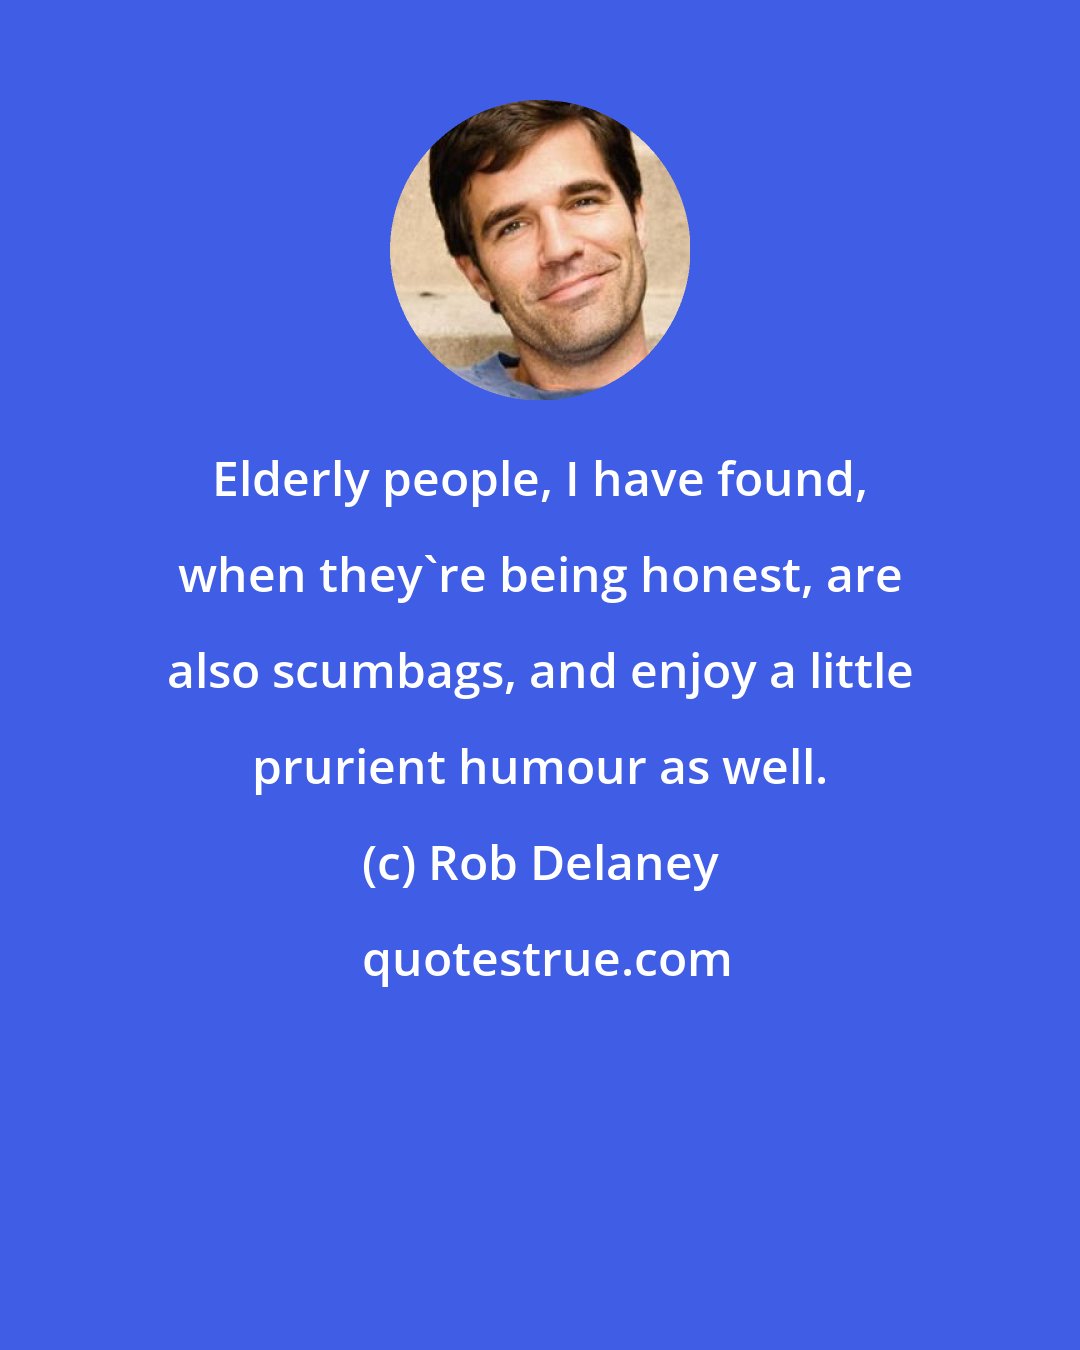 Rob Delaney: Elderly people, I have found, when they're being honest, are also scumbags, and enjoy a little prurient humour as well.